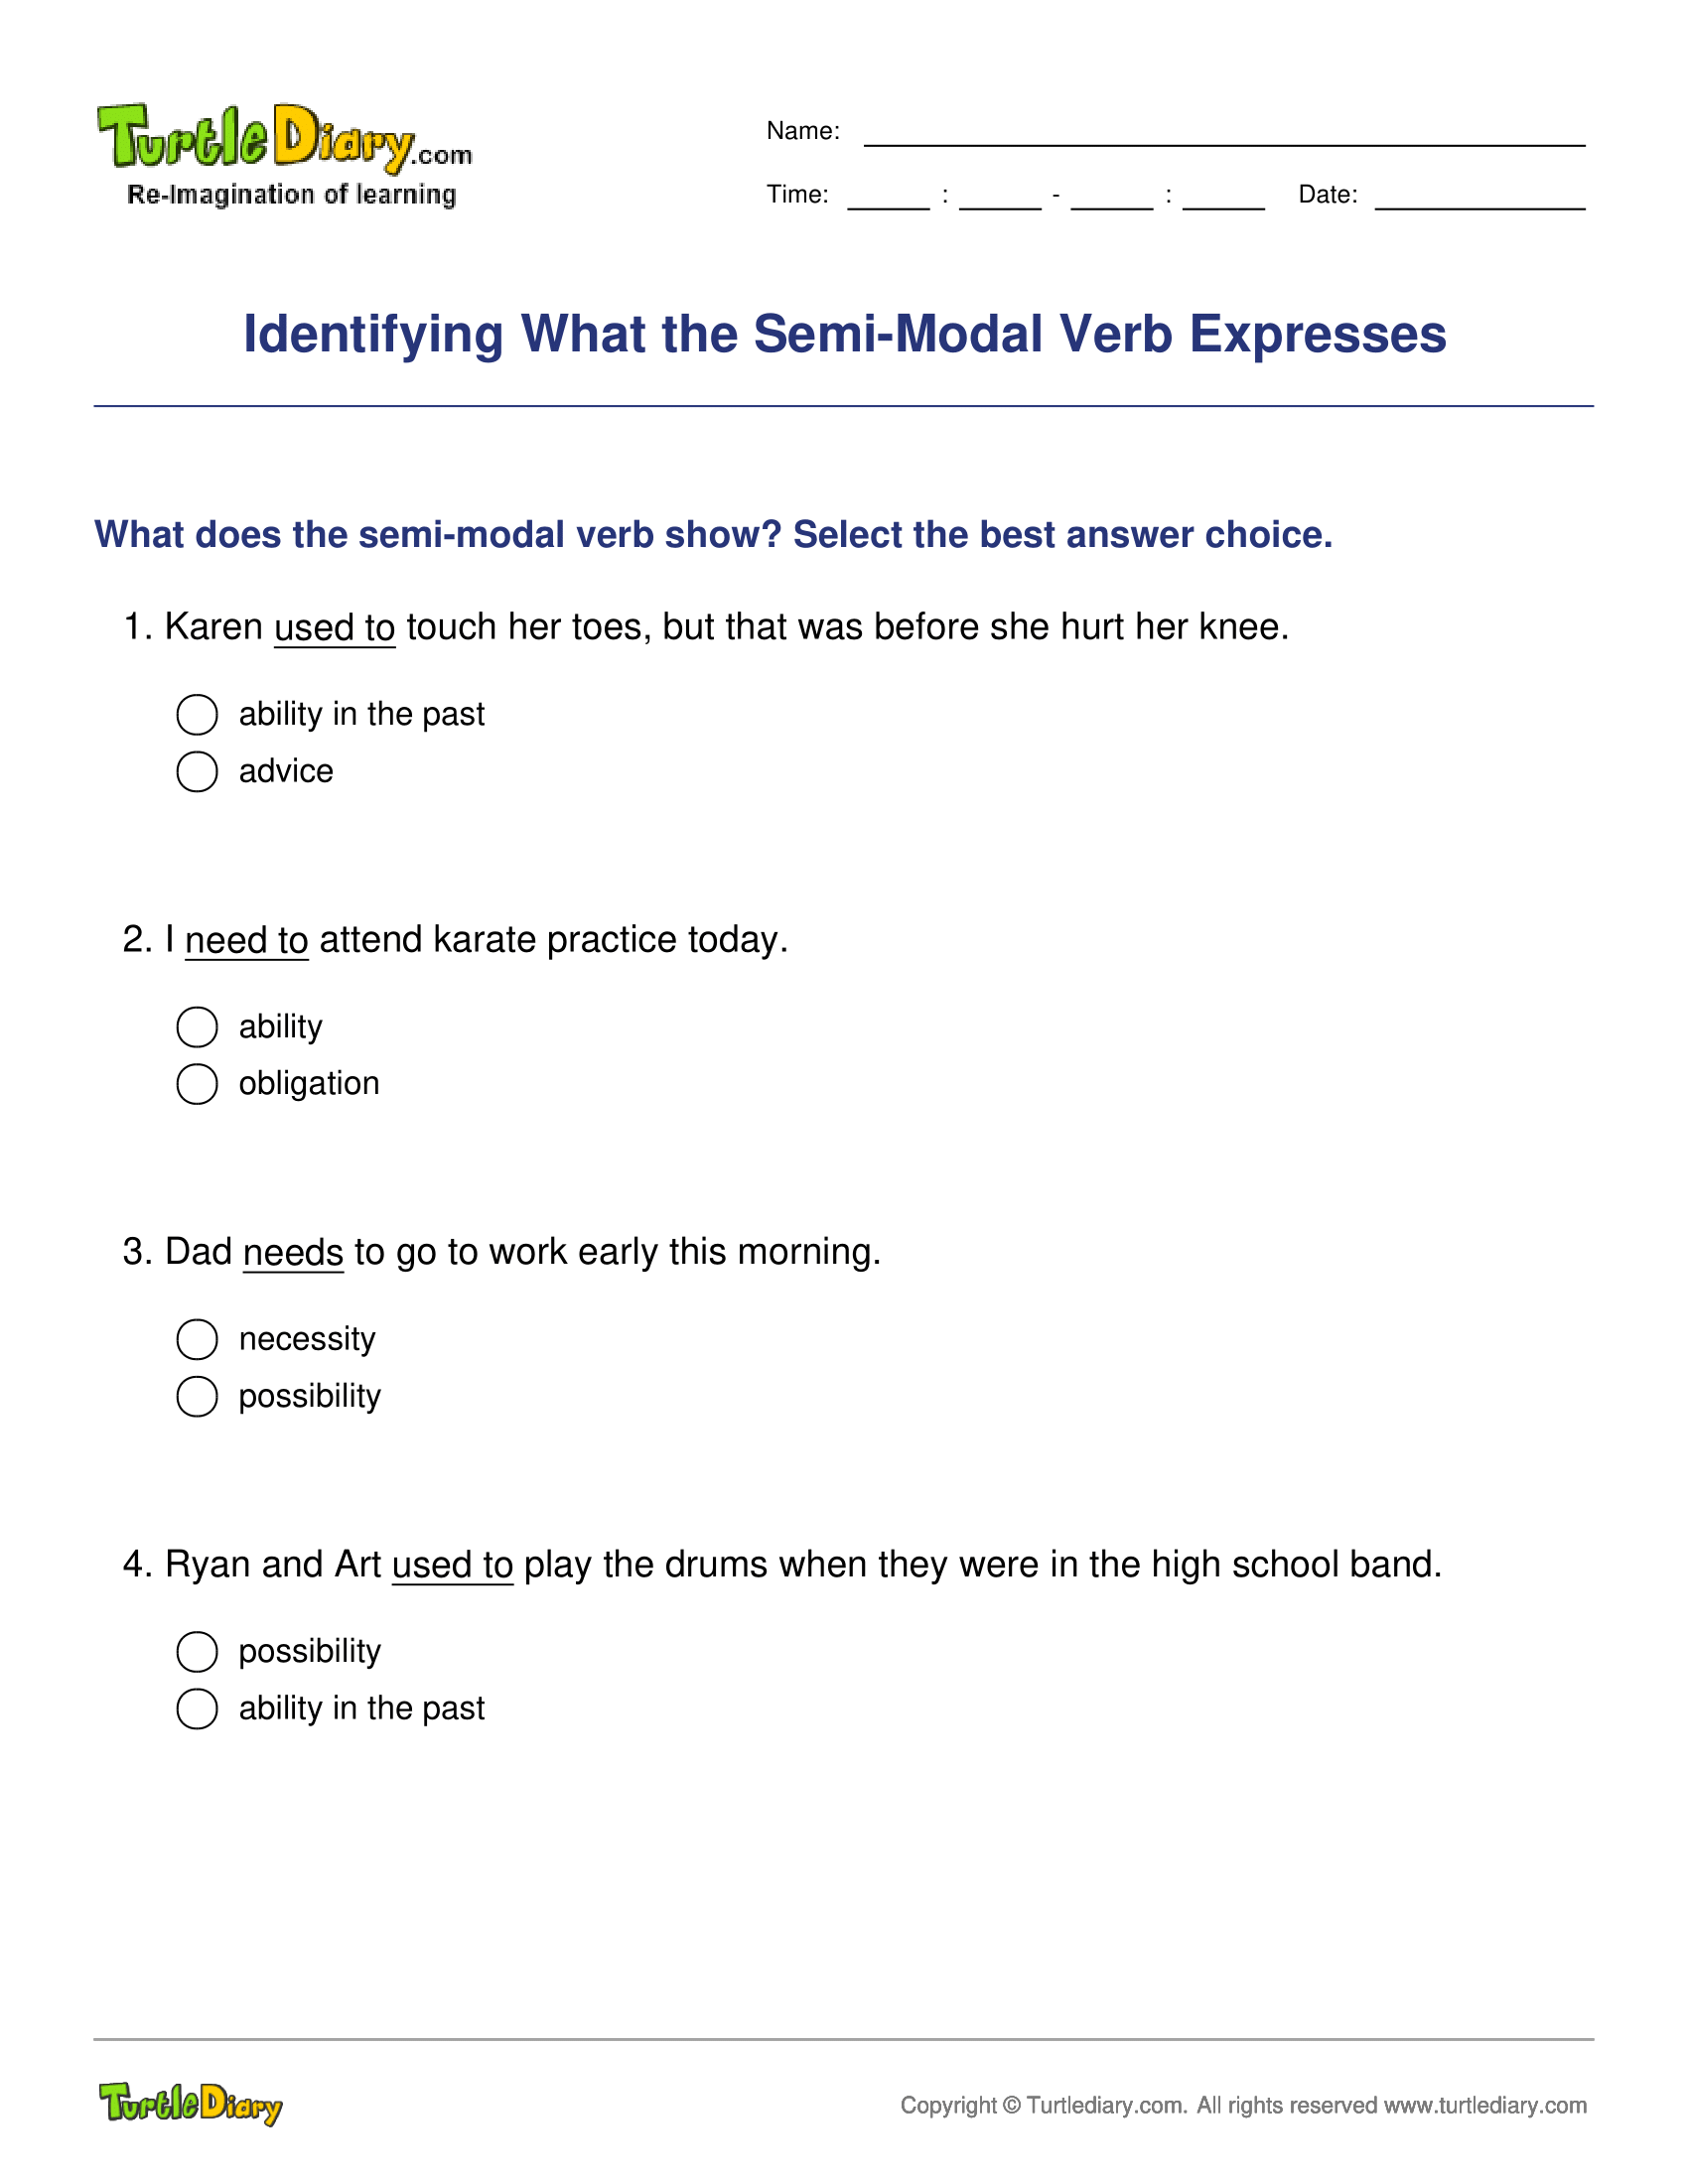 Identifying What the Semi-Modal Verb Expresses